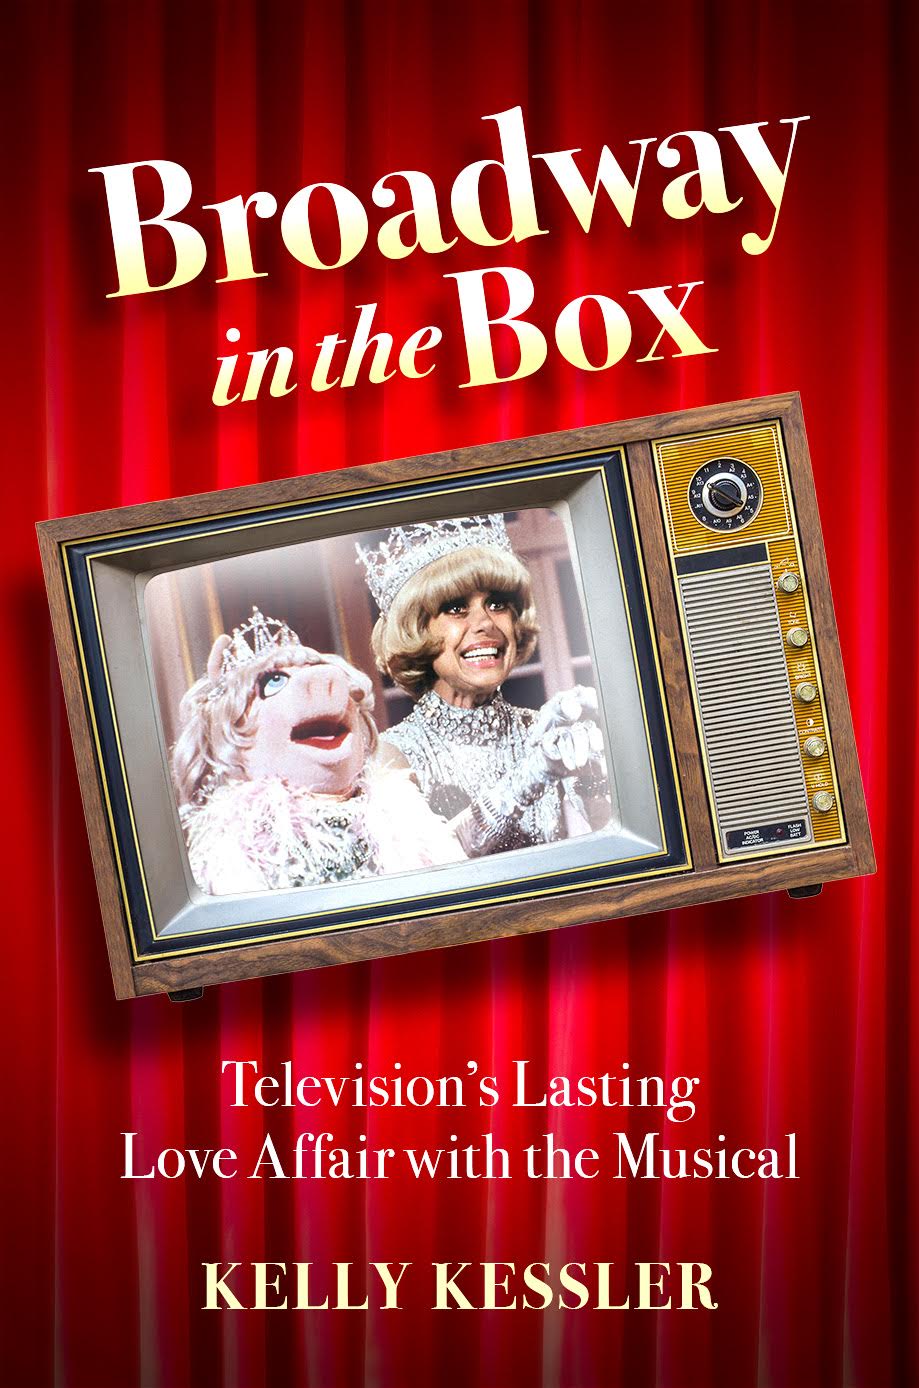 Broadway in the Box: Television's Lasting Love Affair with the Musical